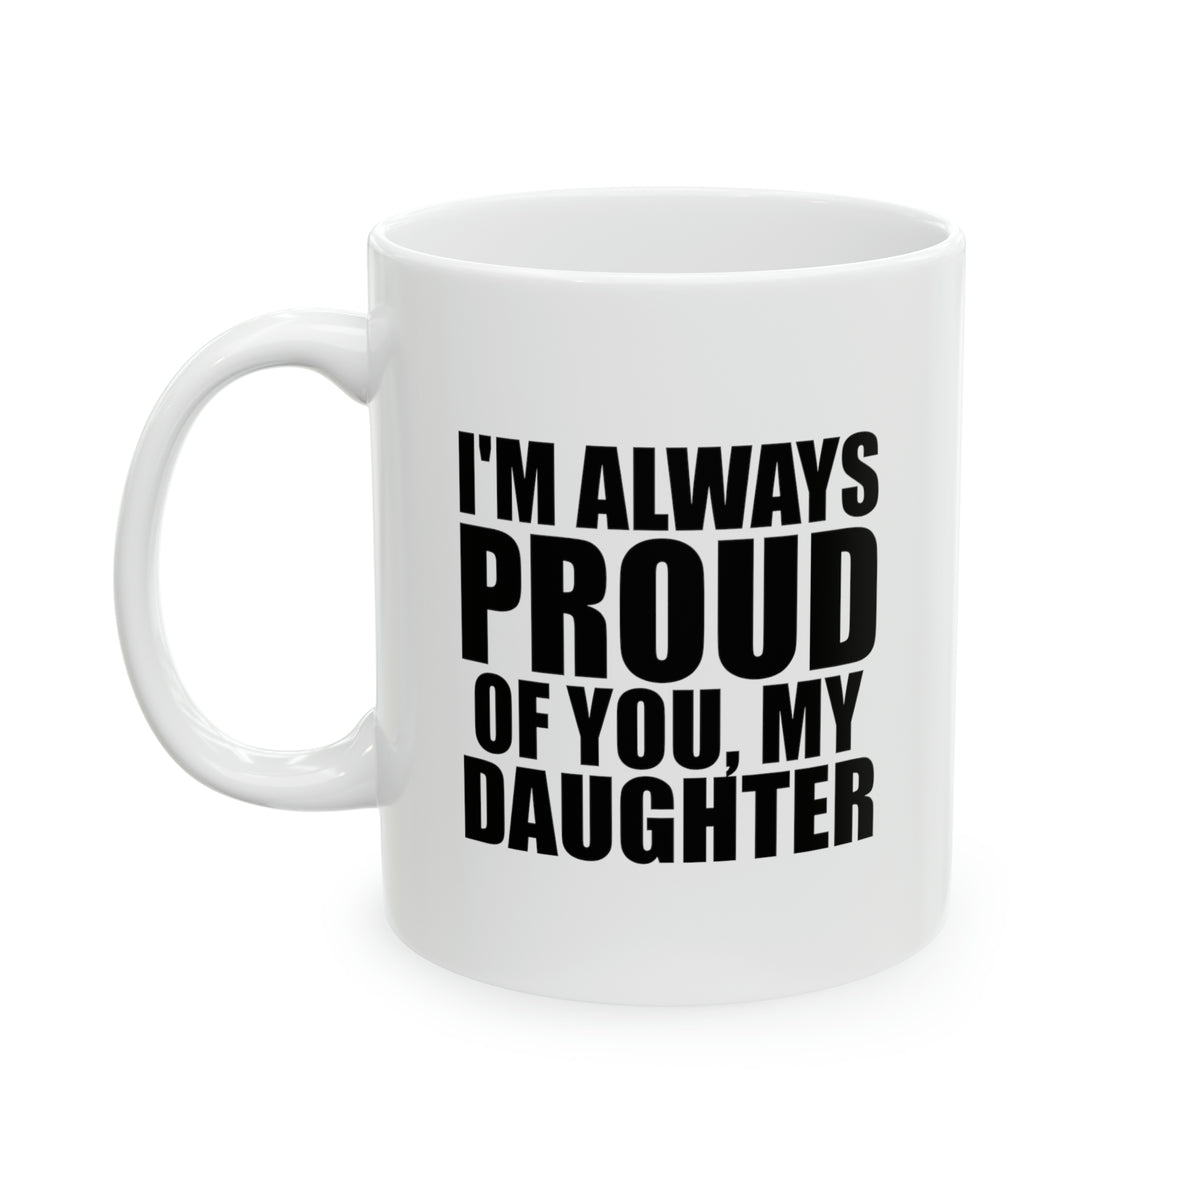 Daughter Gifts - I’m Always Proud Of You, My Daughter - Perfect Mugs For Daughter